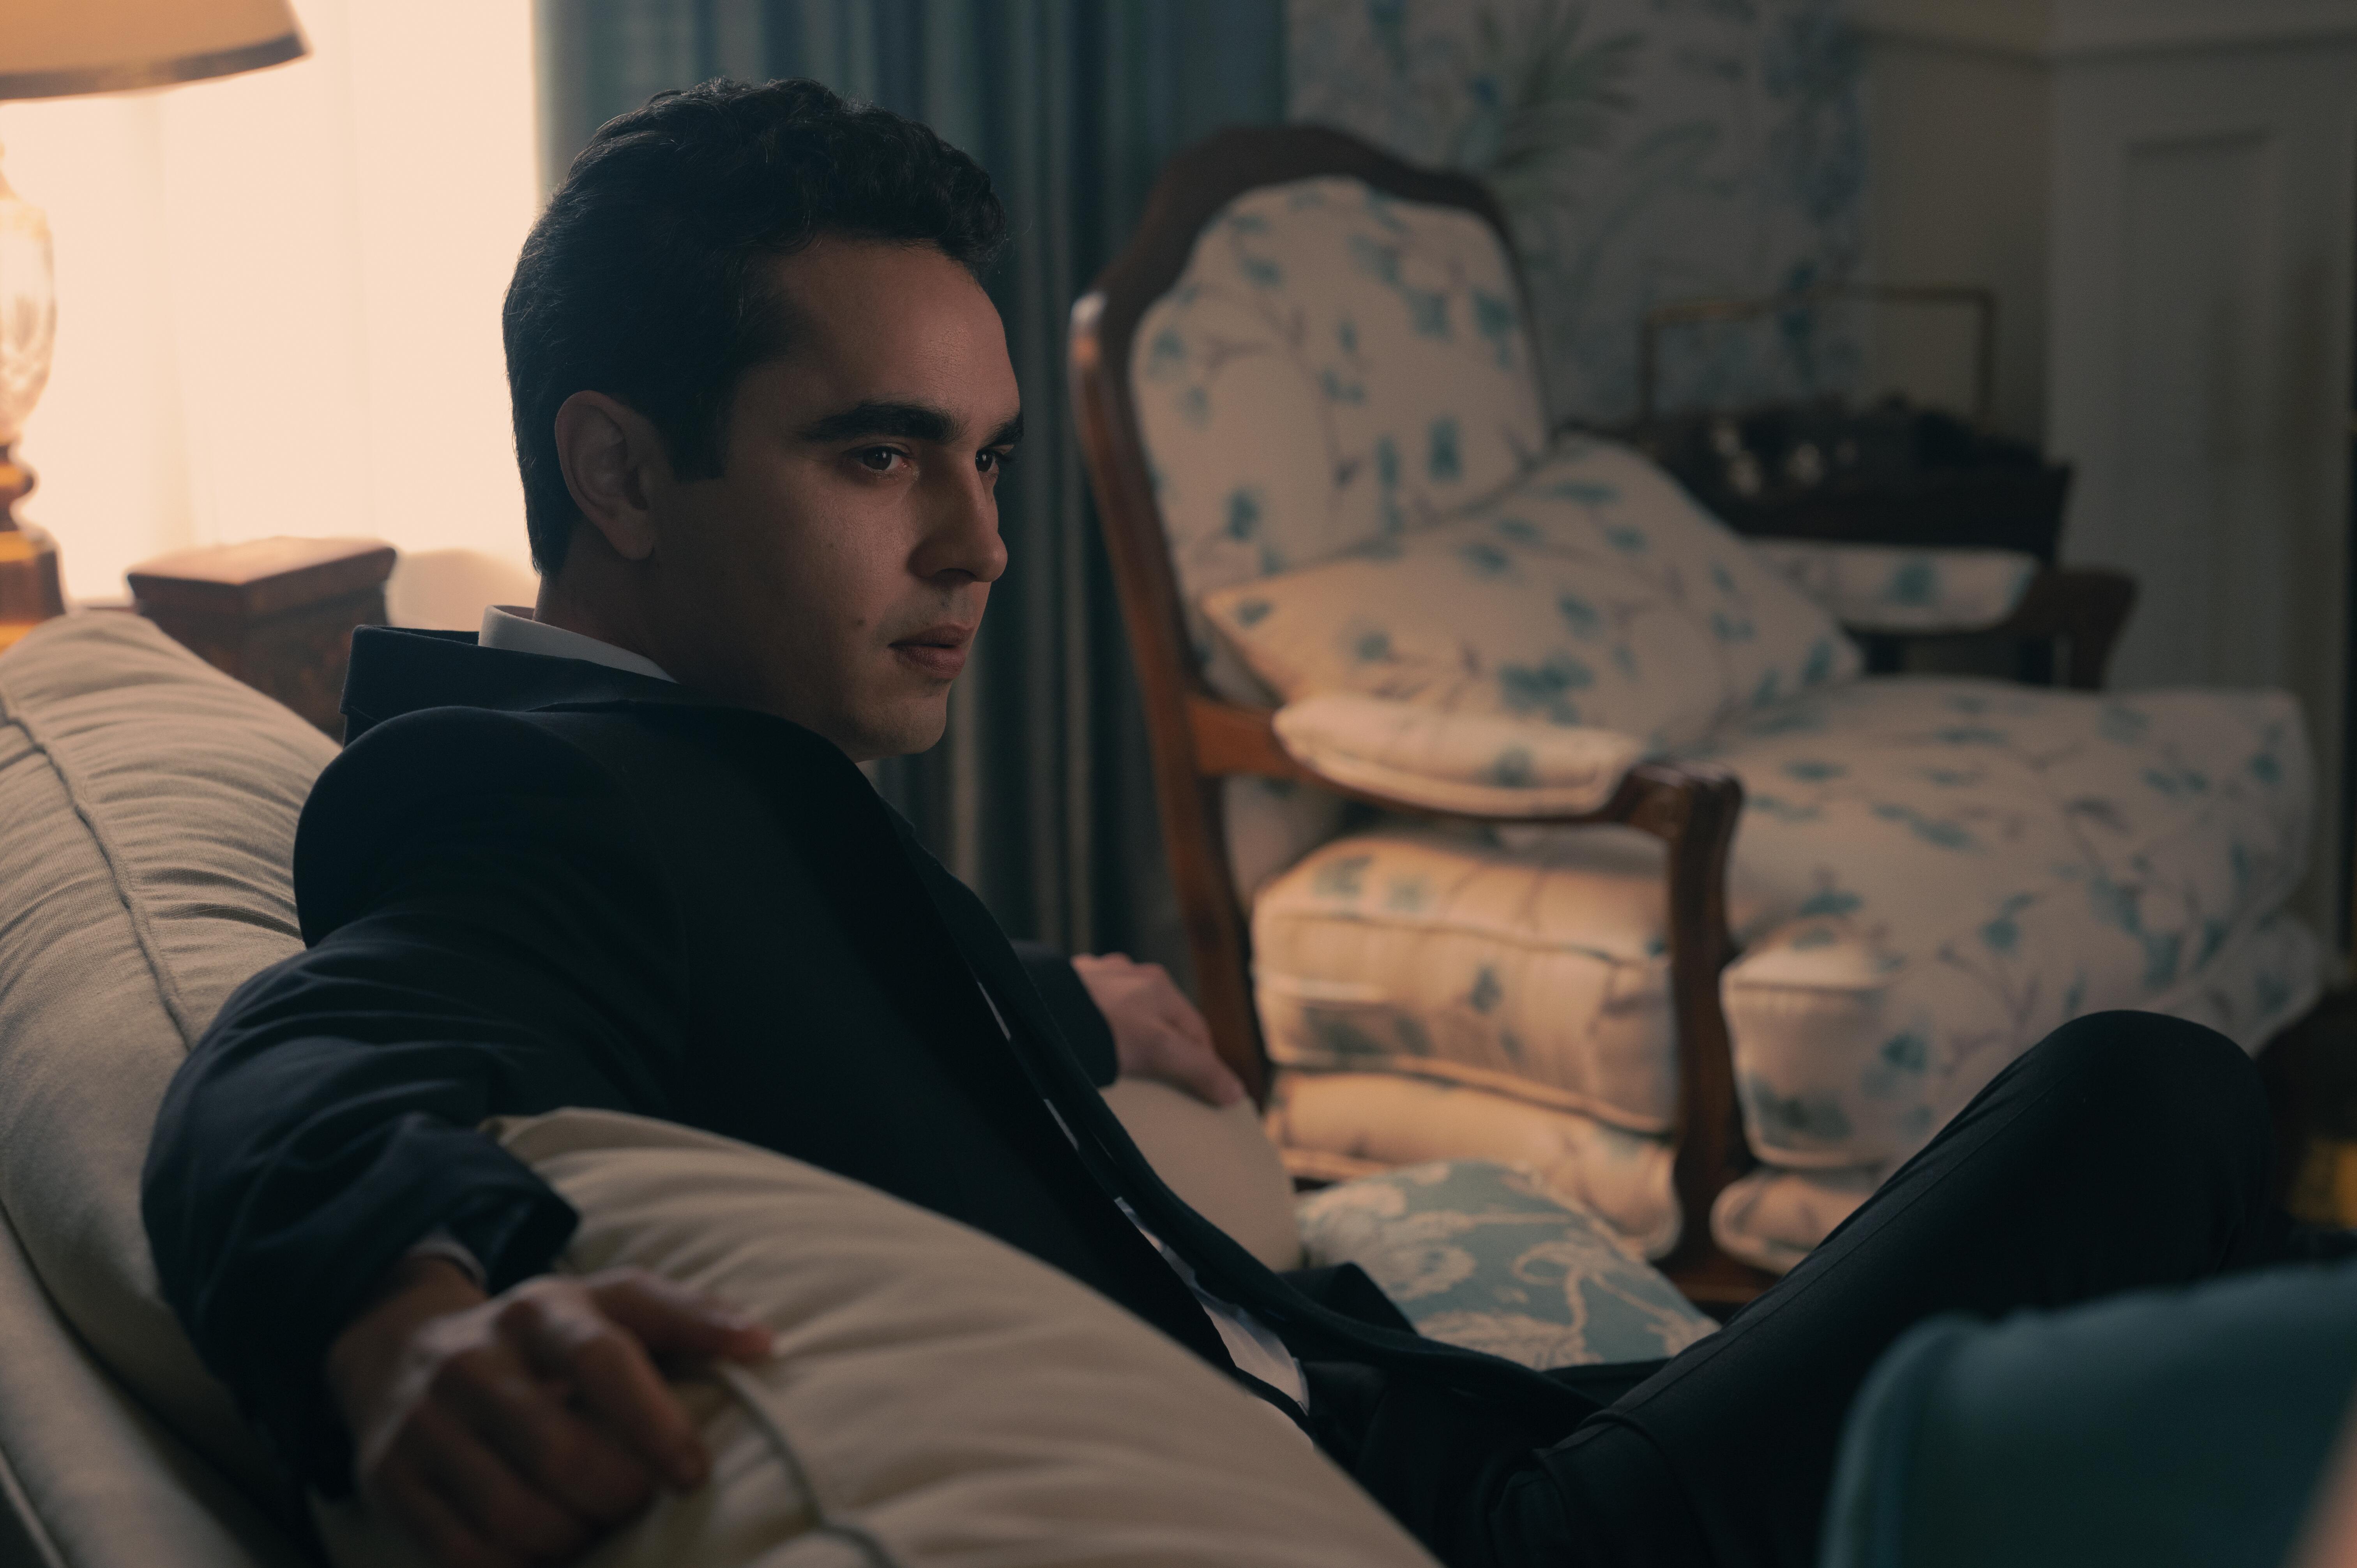 Nick Blaine sits on a couch with his arms outstretched in 'The Handmaid's Tale'